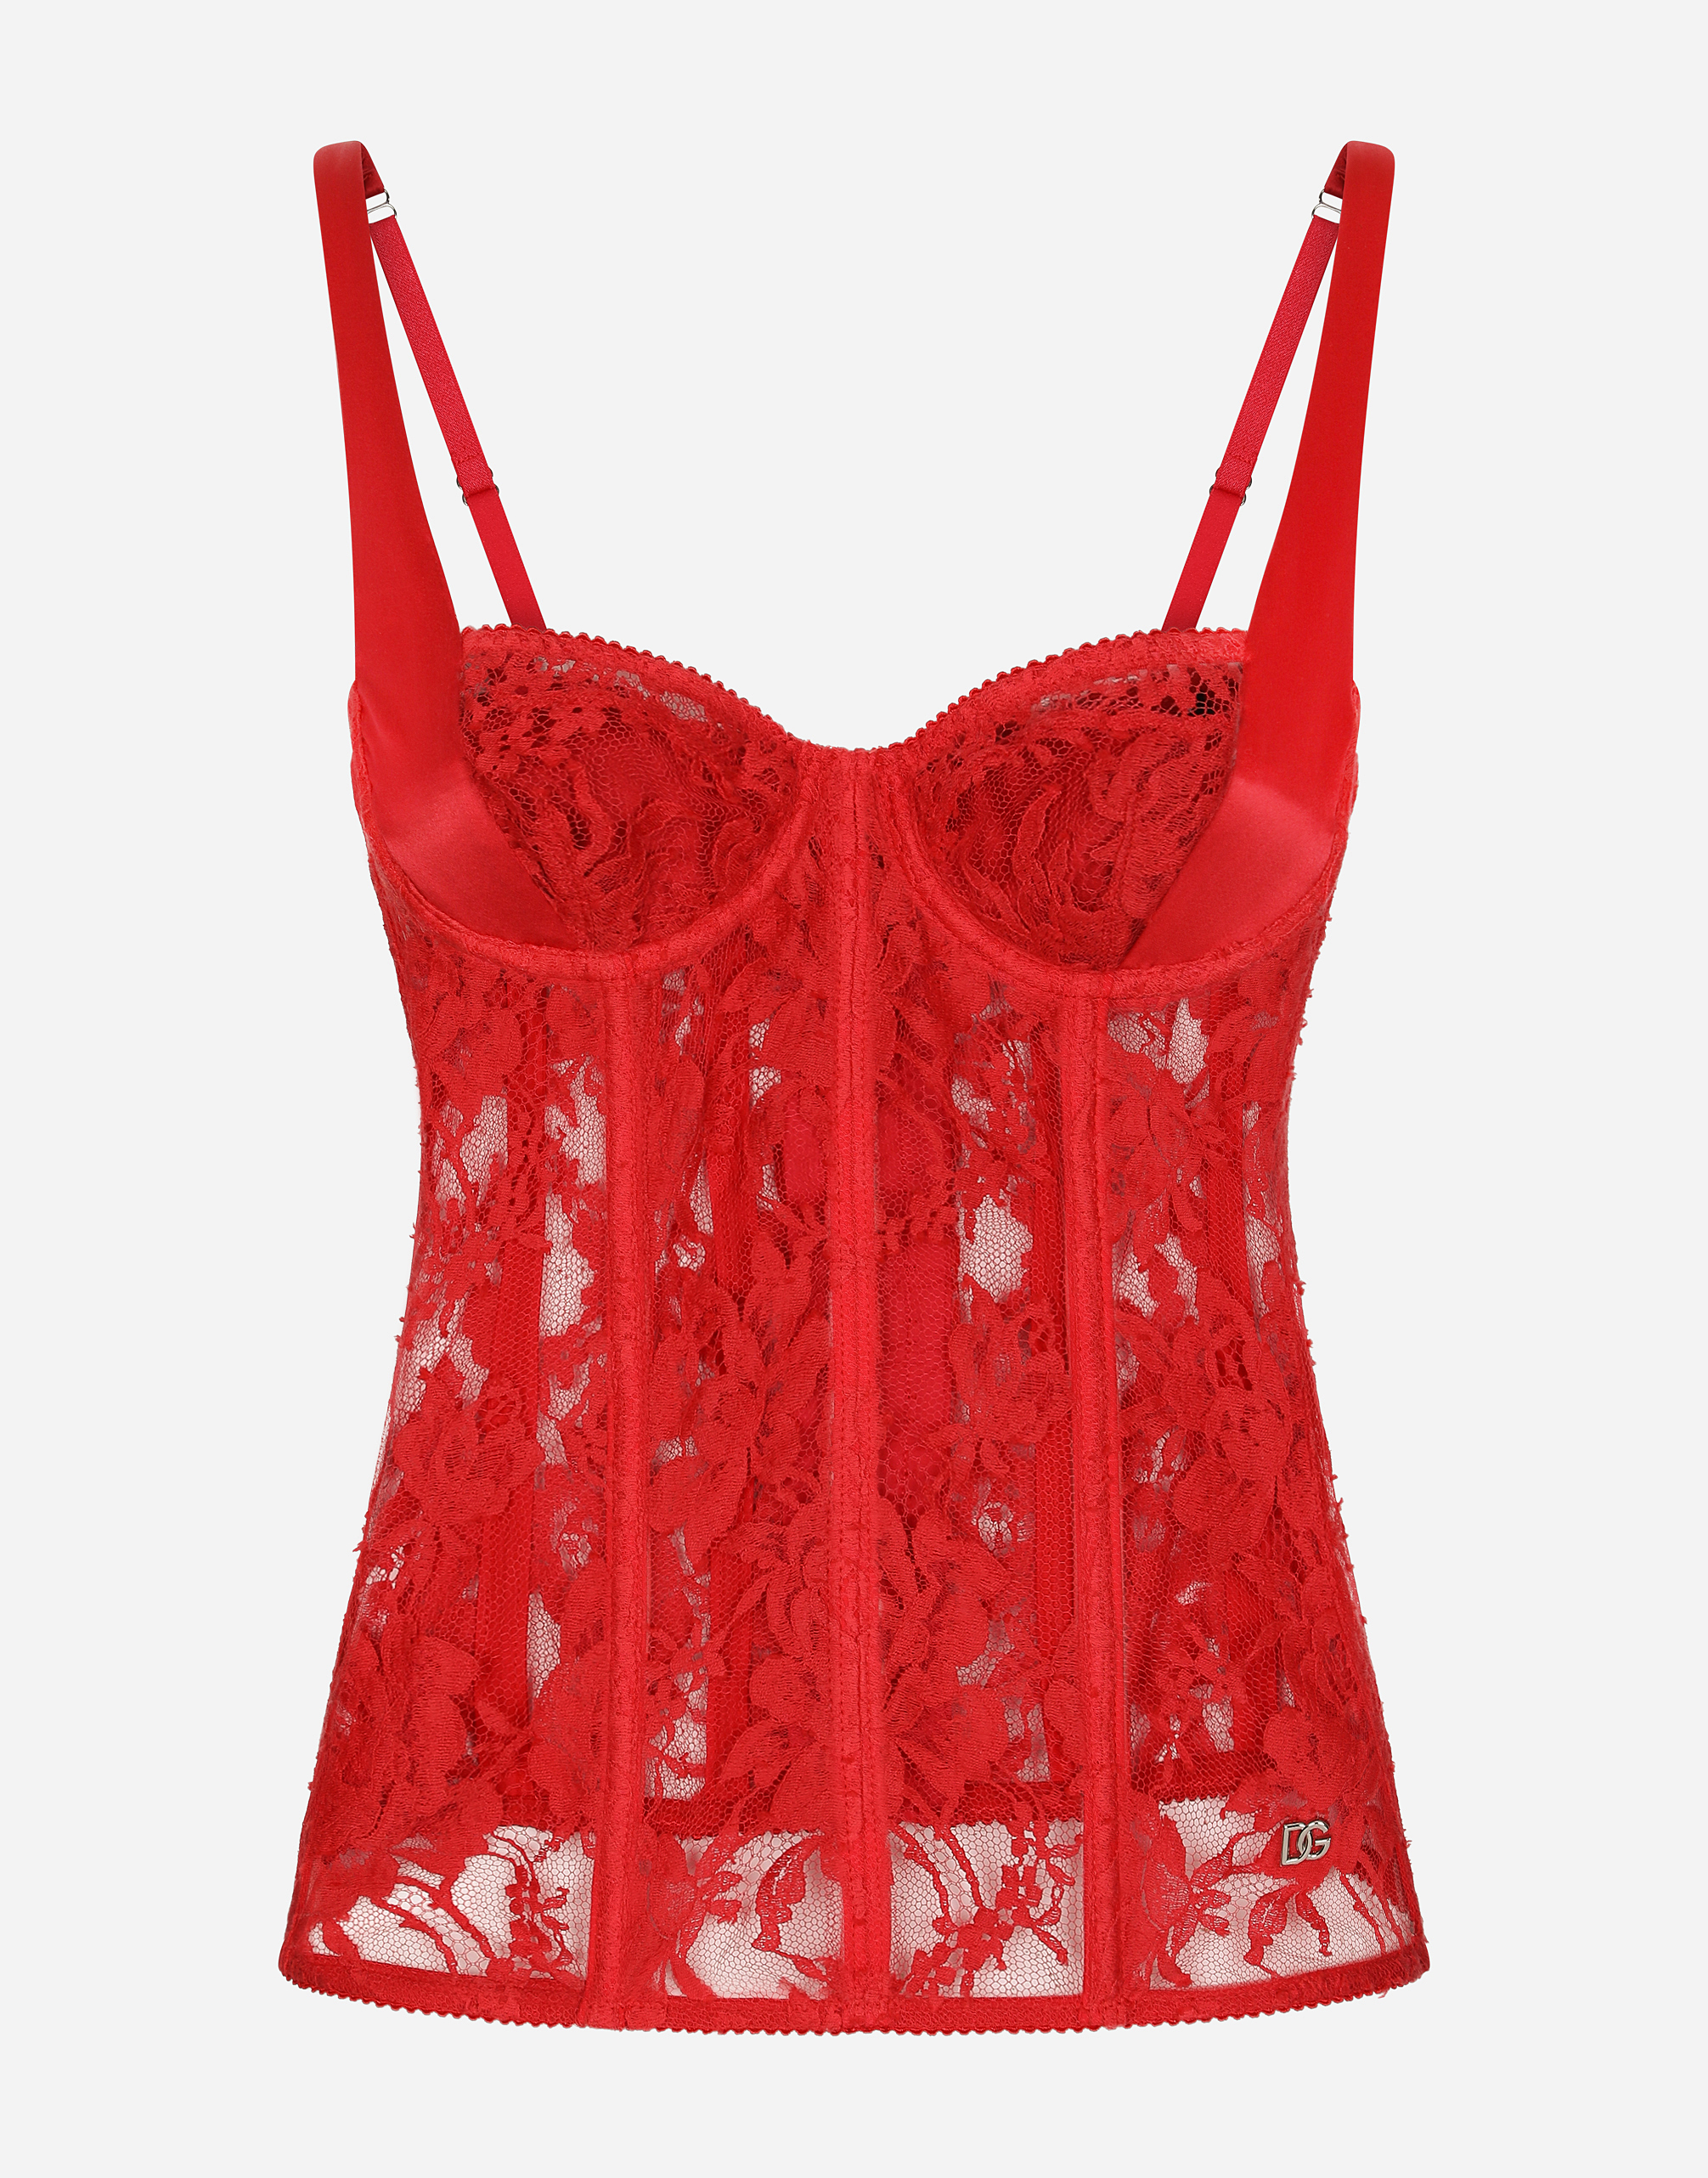 Lace lingerie corset in Red